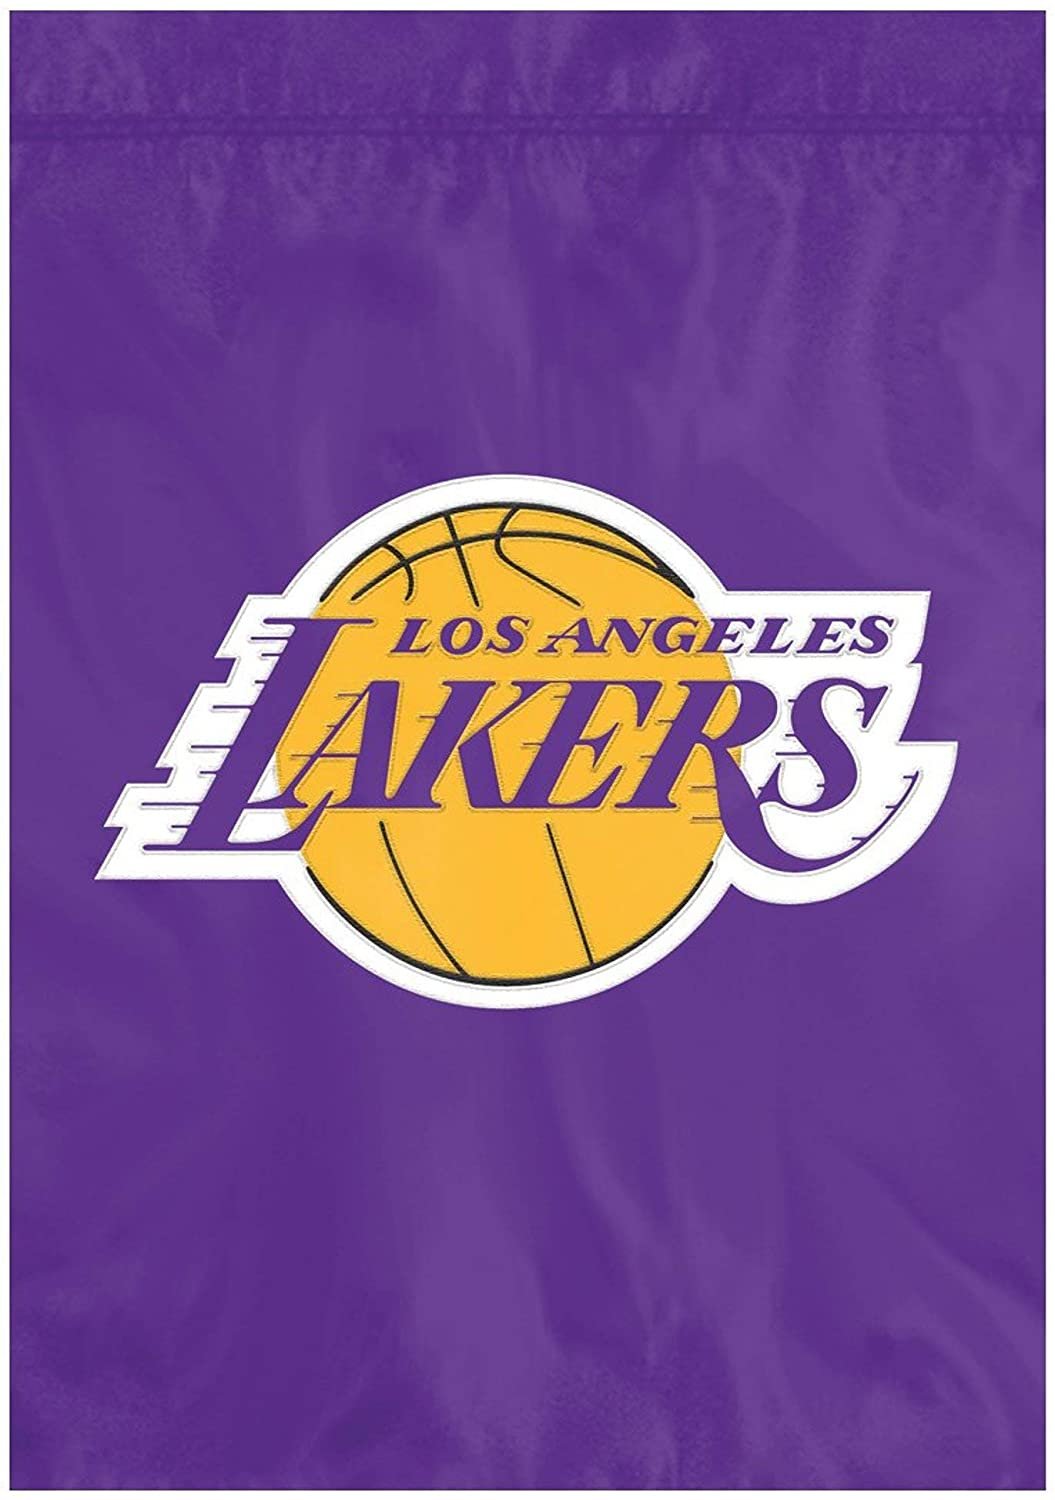 Los Angeles Lakers Premium Garden Flag Banner Applique Embroidered 12.5x18 Inch